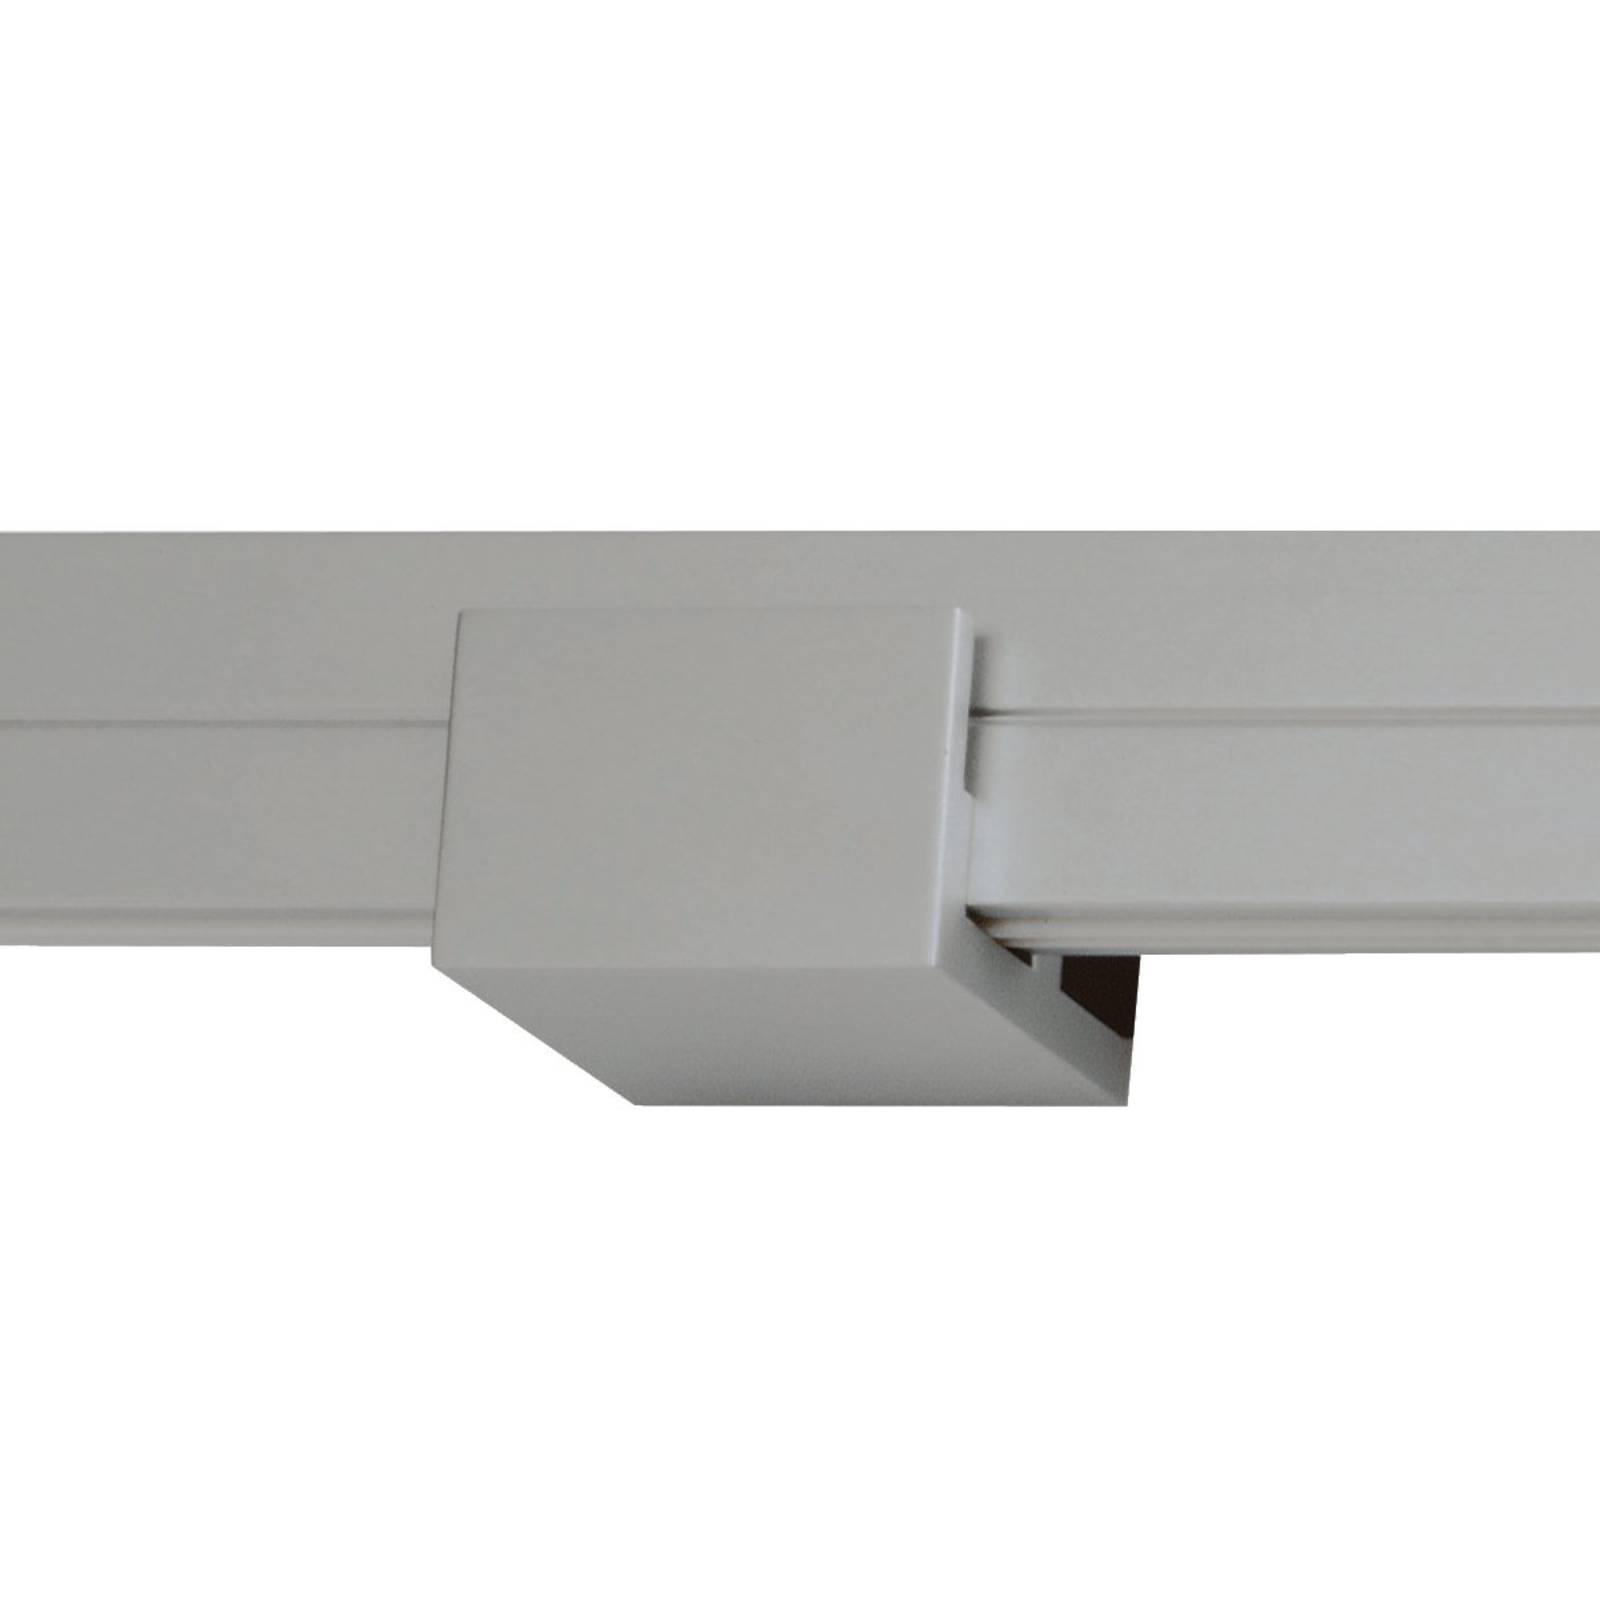 Wall support for track lighting system Check-In